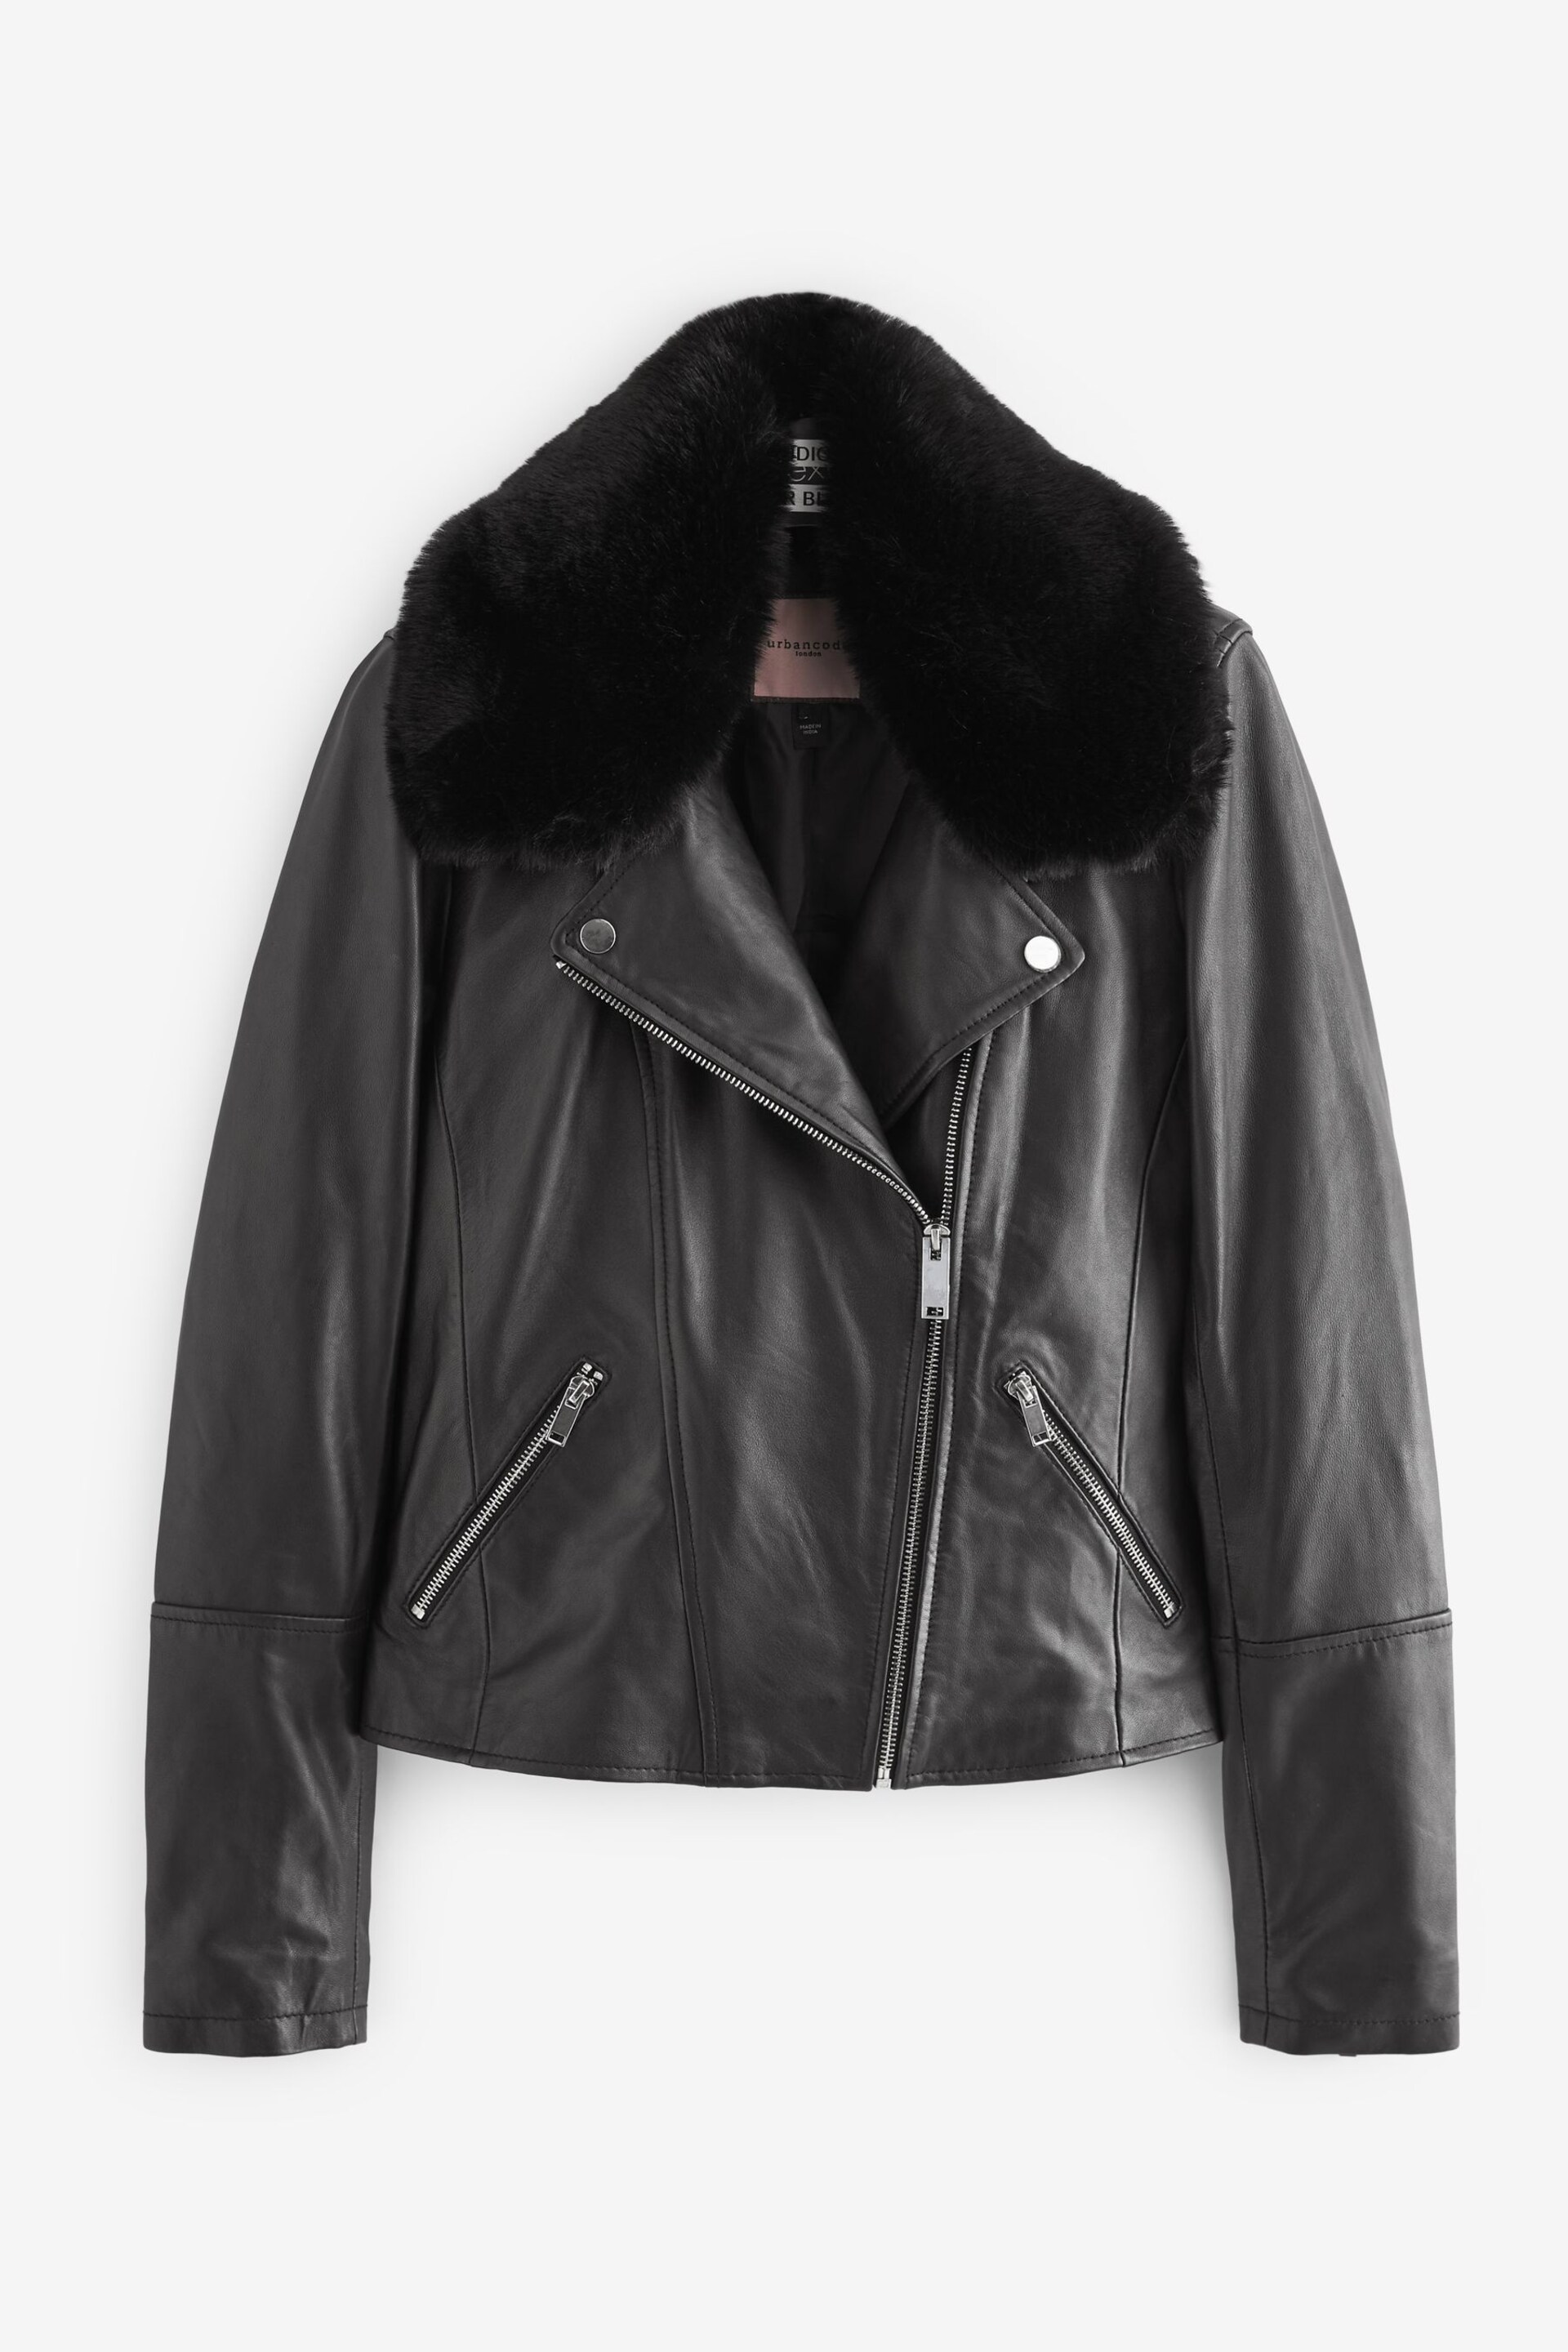 Urban Code Black Leather Biker With Removable Faux Fur Collar Jacket - Image 6 of 8